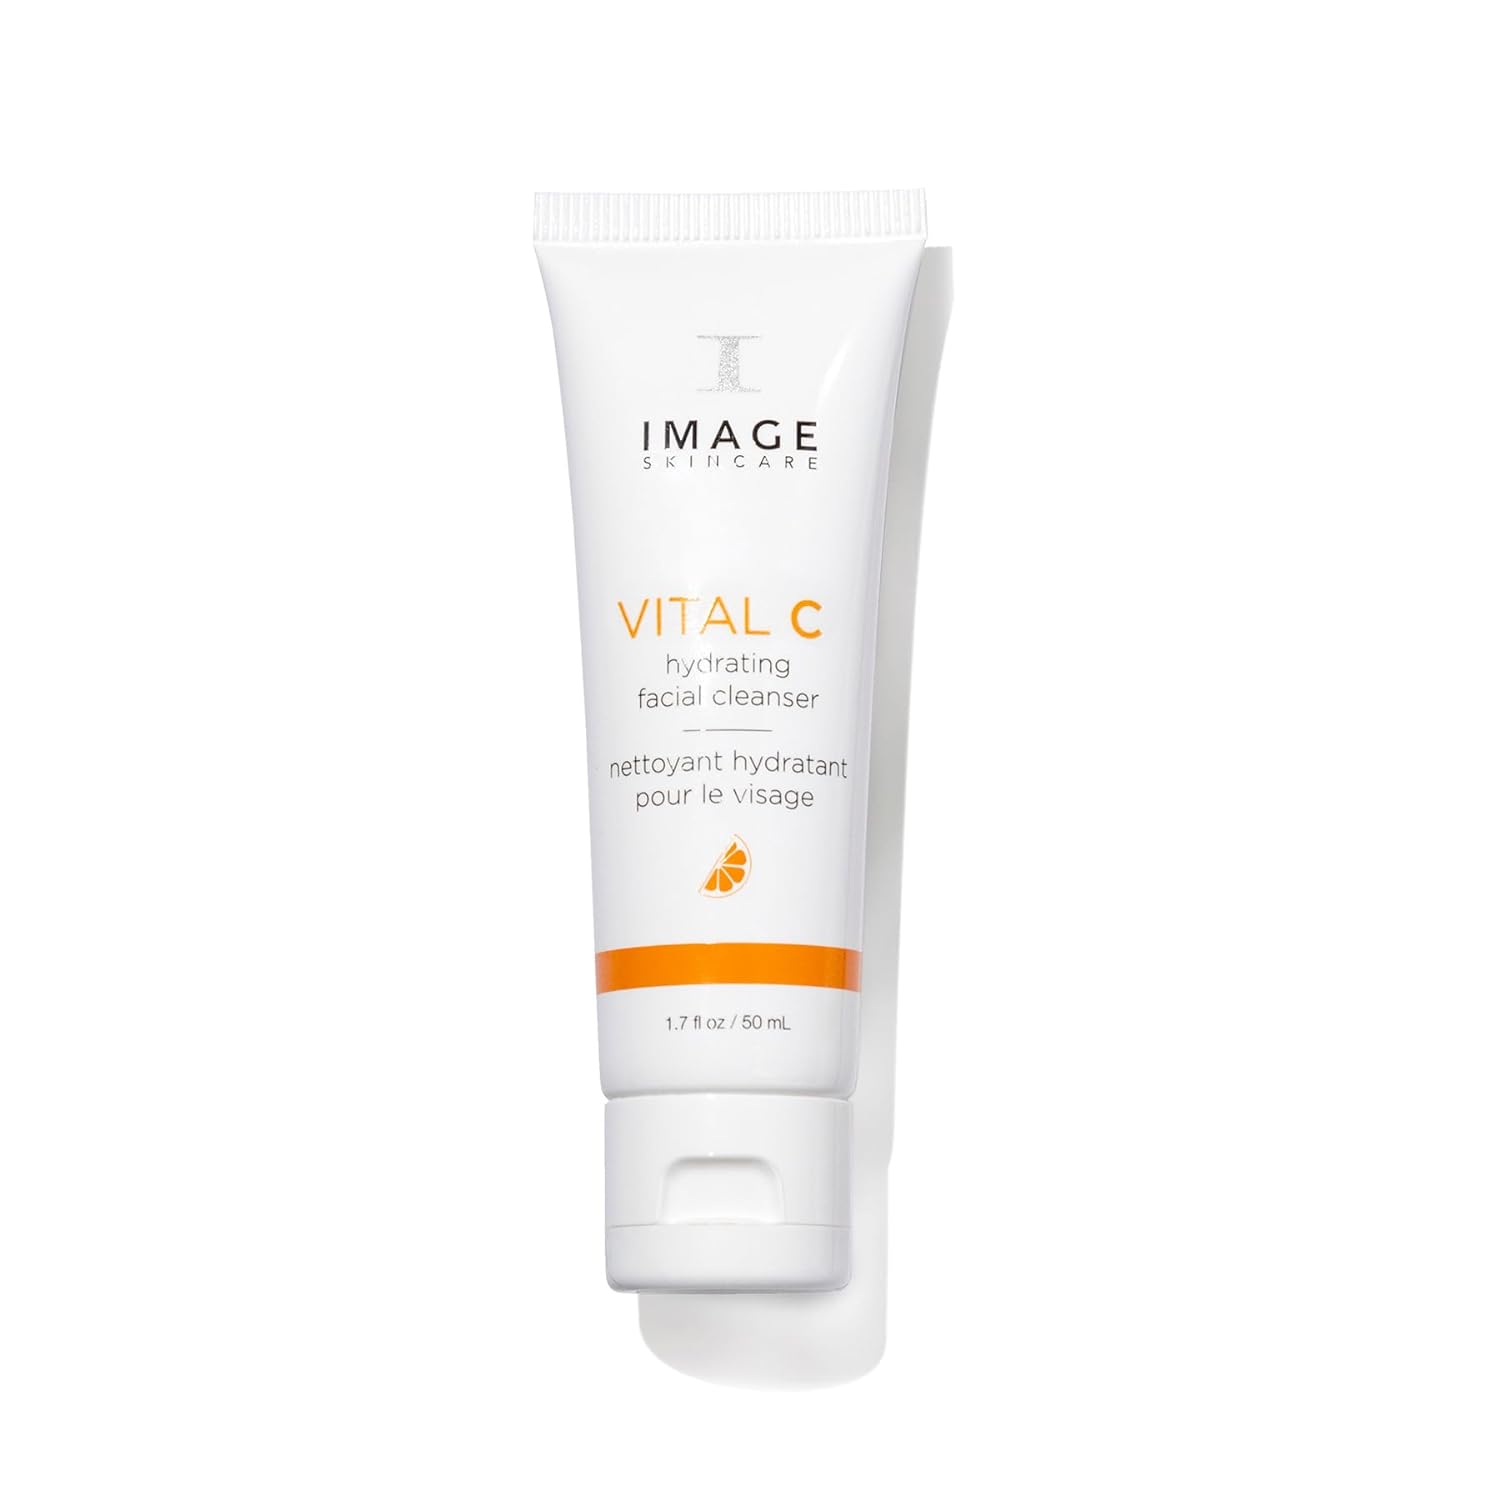 Image VITAL C hydrating facial cleanser